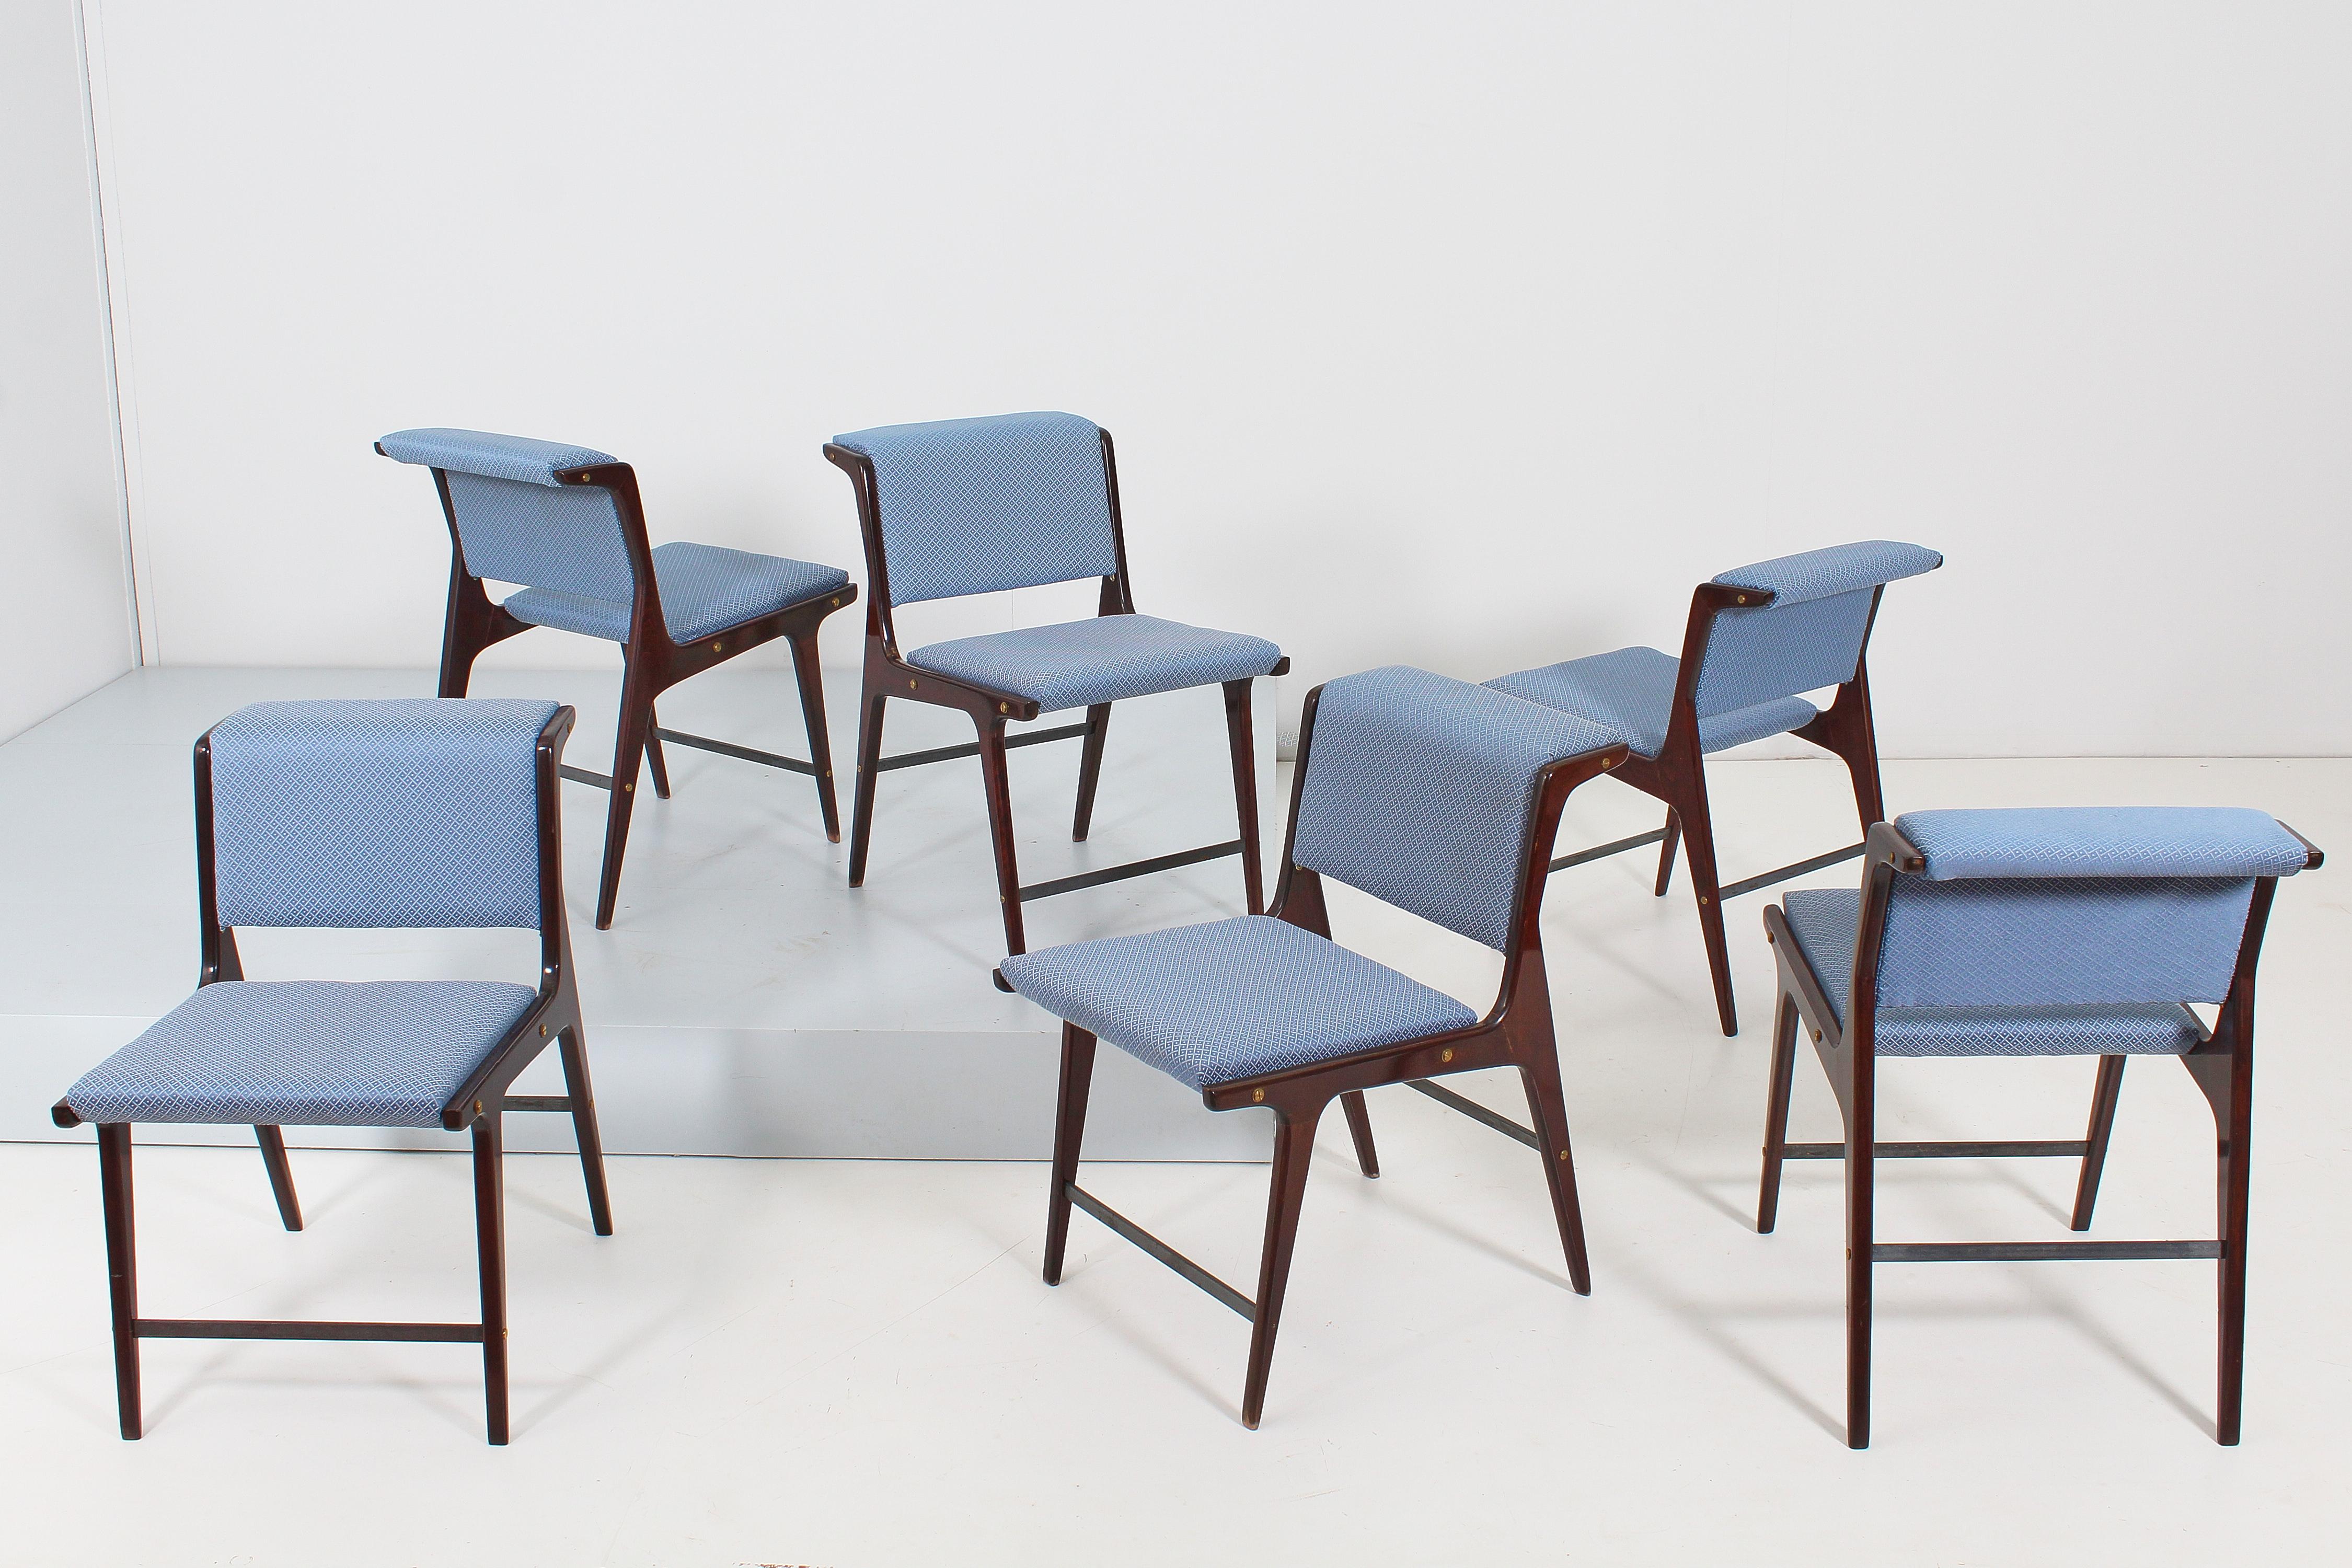 Rare and wonderful set of six chairs with a geometric design with a shaped wooden structure, continuous padding of the seat and back, upholstered in fine blue fabric with white geometric patterns. Elegant pointed legs, connected at the back by a